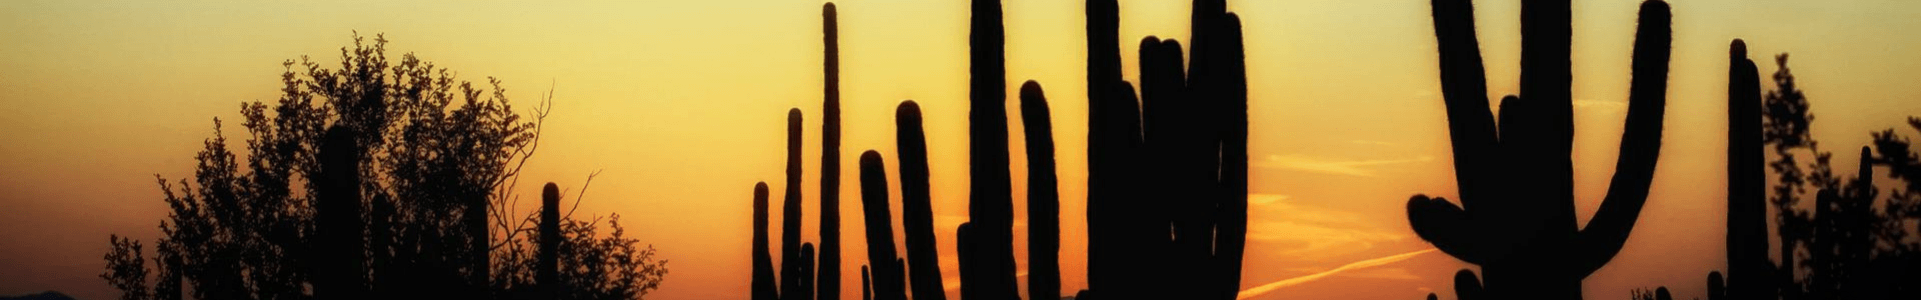 Stock Image of Sunset Behind Cacti and Bushes Shadows